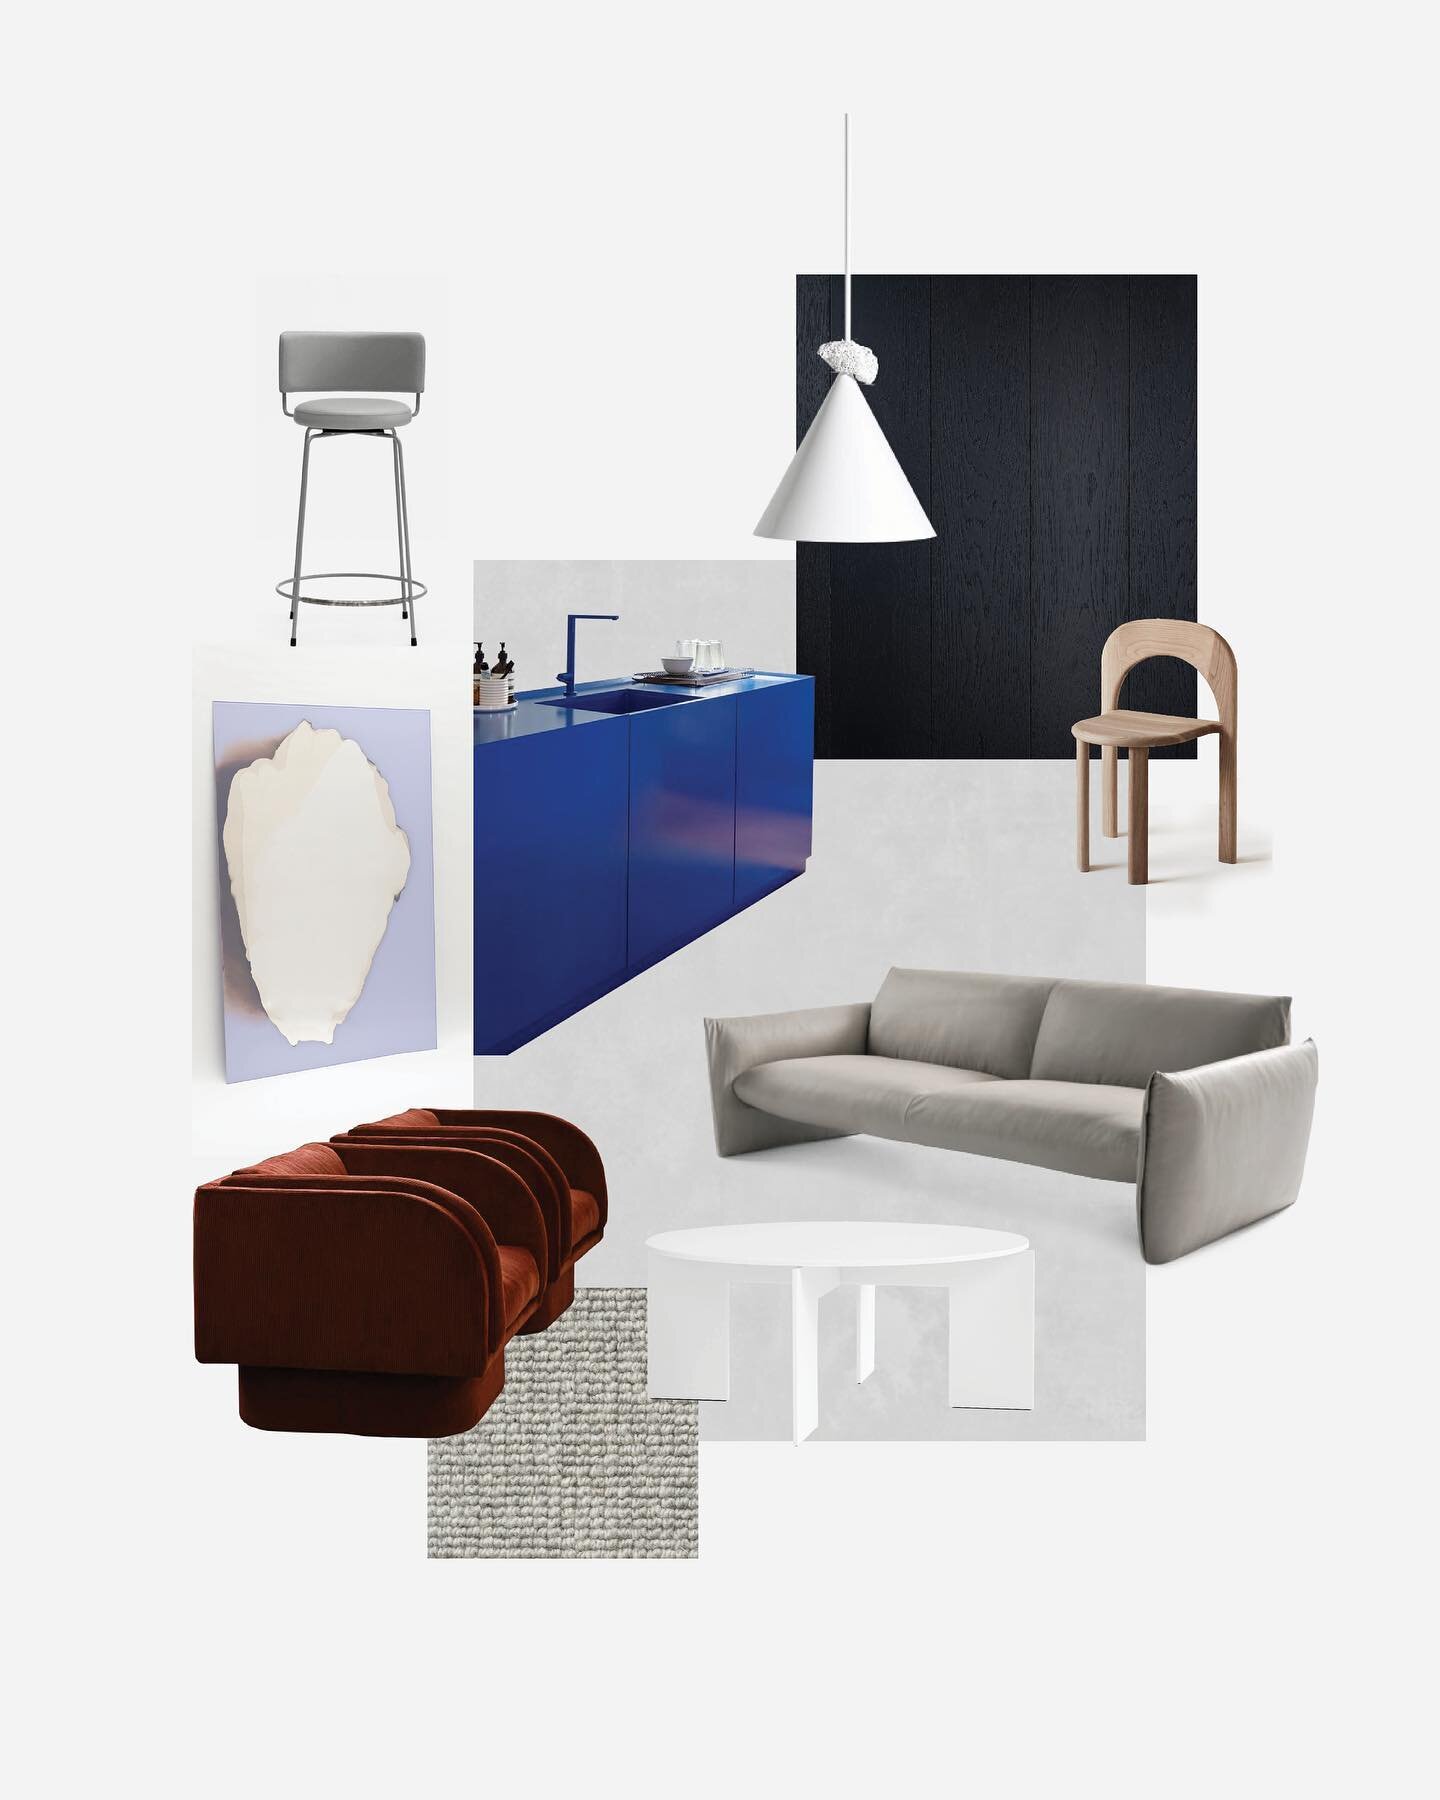 #forwardboard 
⁠
A muted sofa and coffee table with bonelike construction gives a luxuriously primal base to this selection of Australian-made pieces. With aesthetic reference to both our past, present and unavoidably futuristic fate, large masses of